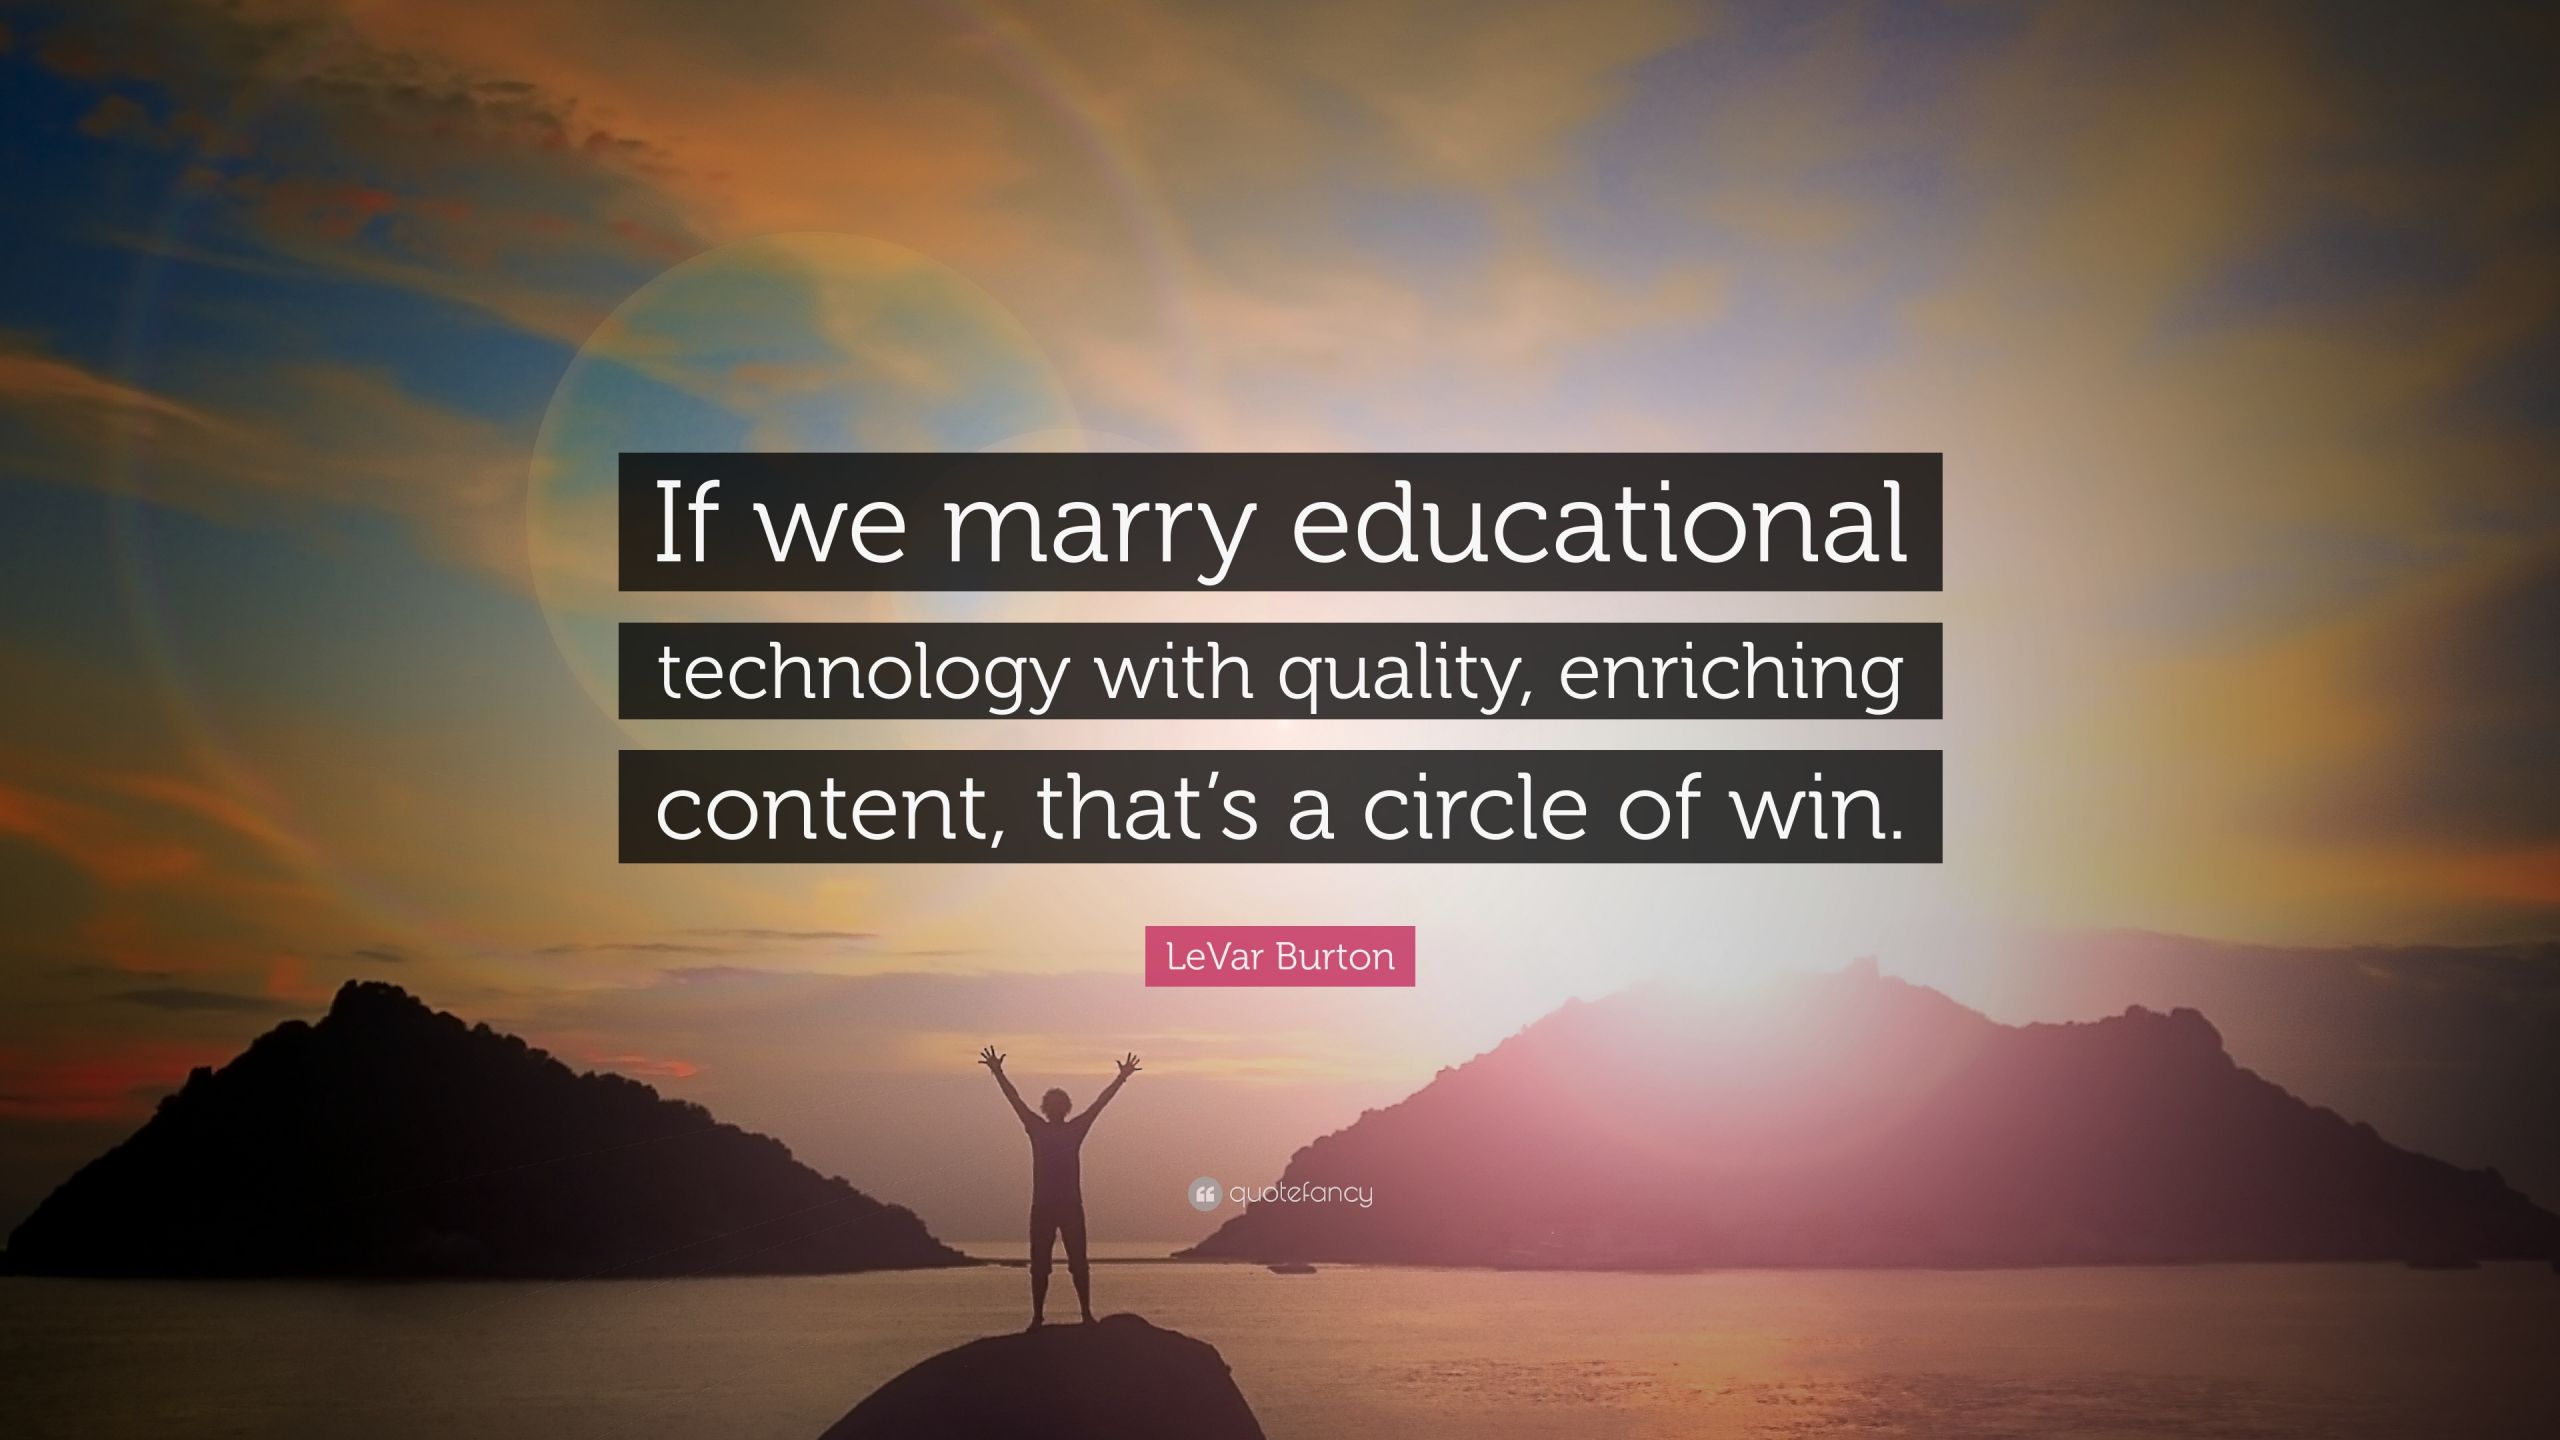 Quotes About Technology And Education
 LeVar Burton Quote “If we marry educational technology